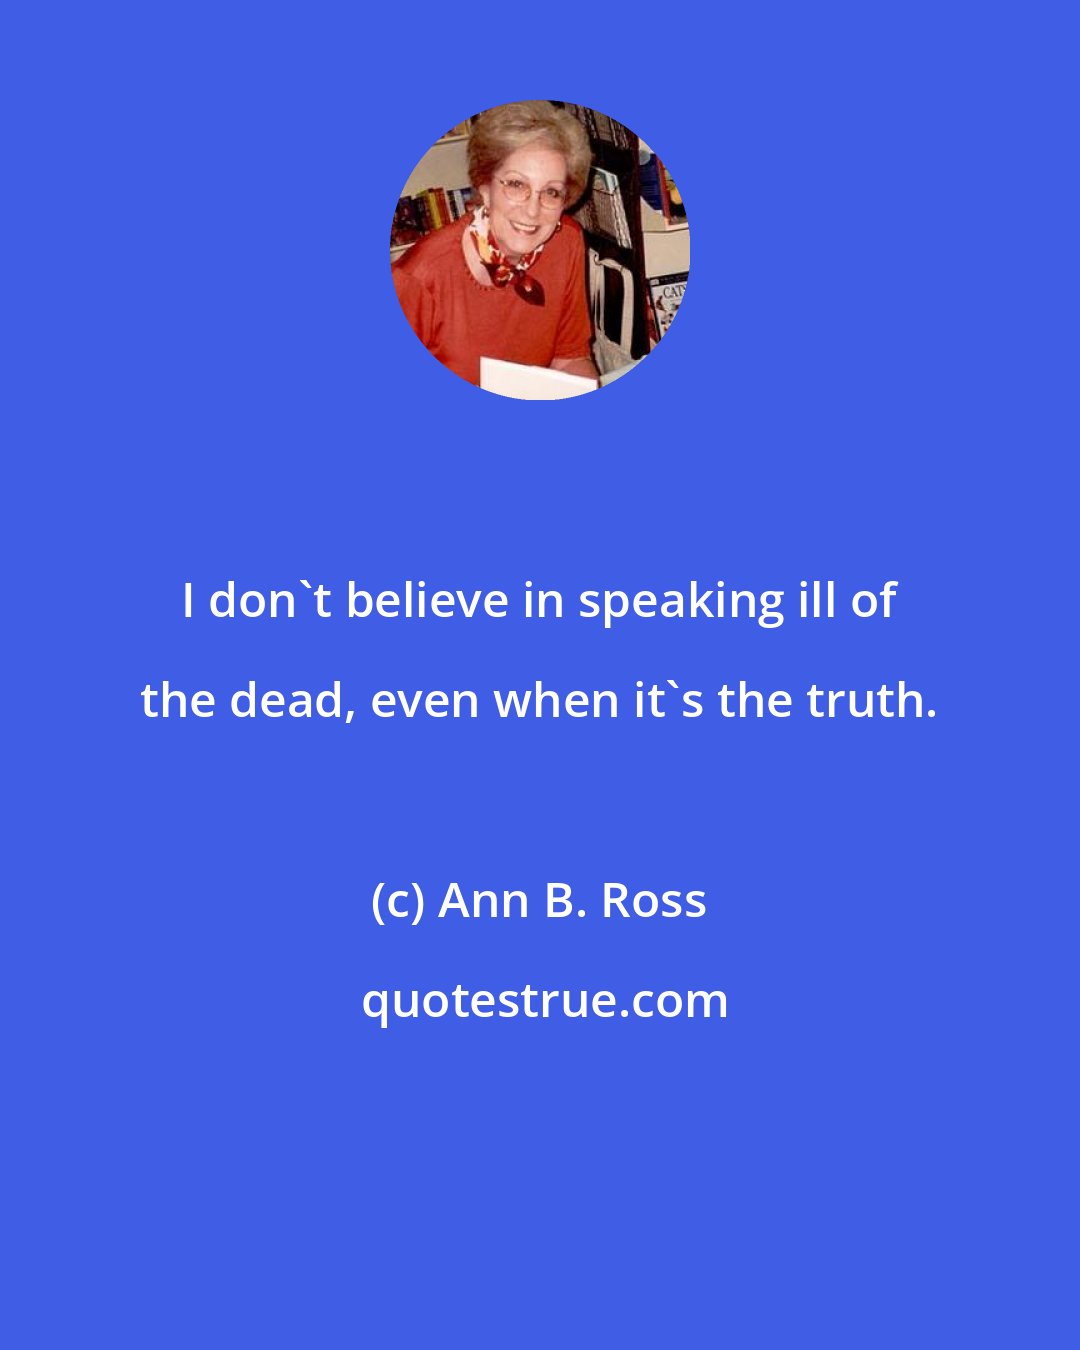 Ann B. Ross: I don't believe in speaking ill of the dead, even when it's the truth.